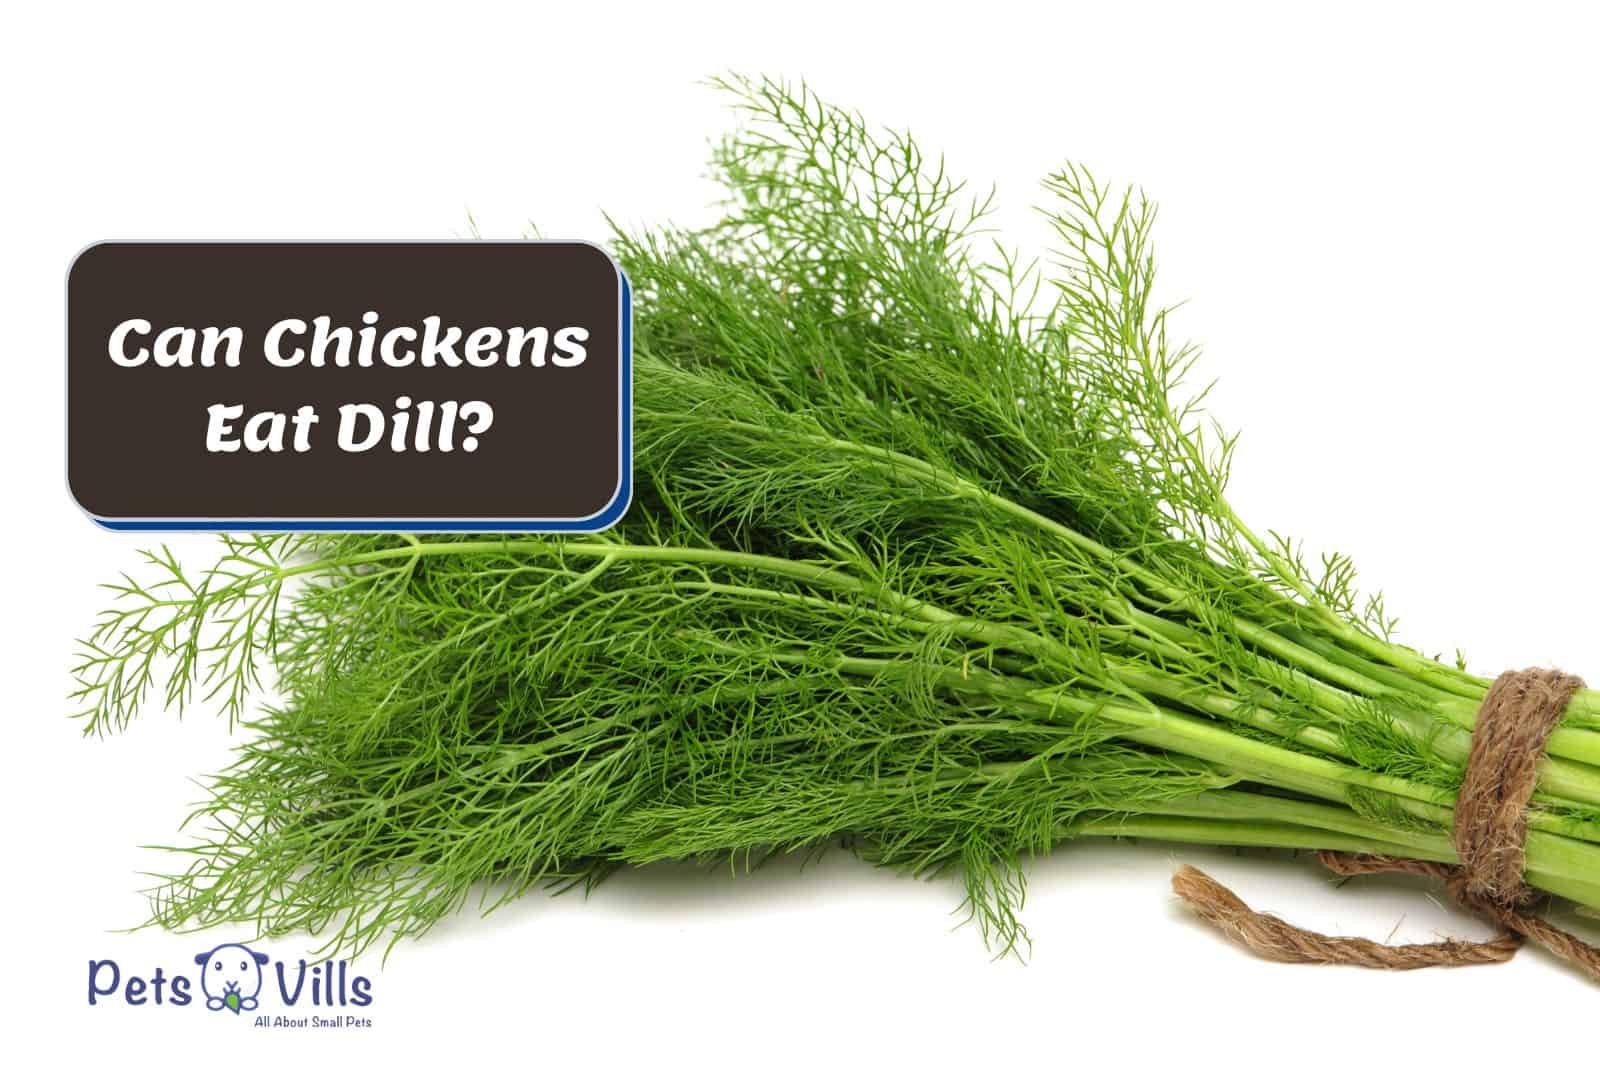 fresh dill beside Can Chickens Eat Dill text